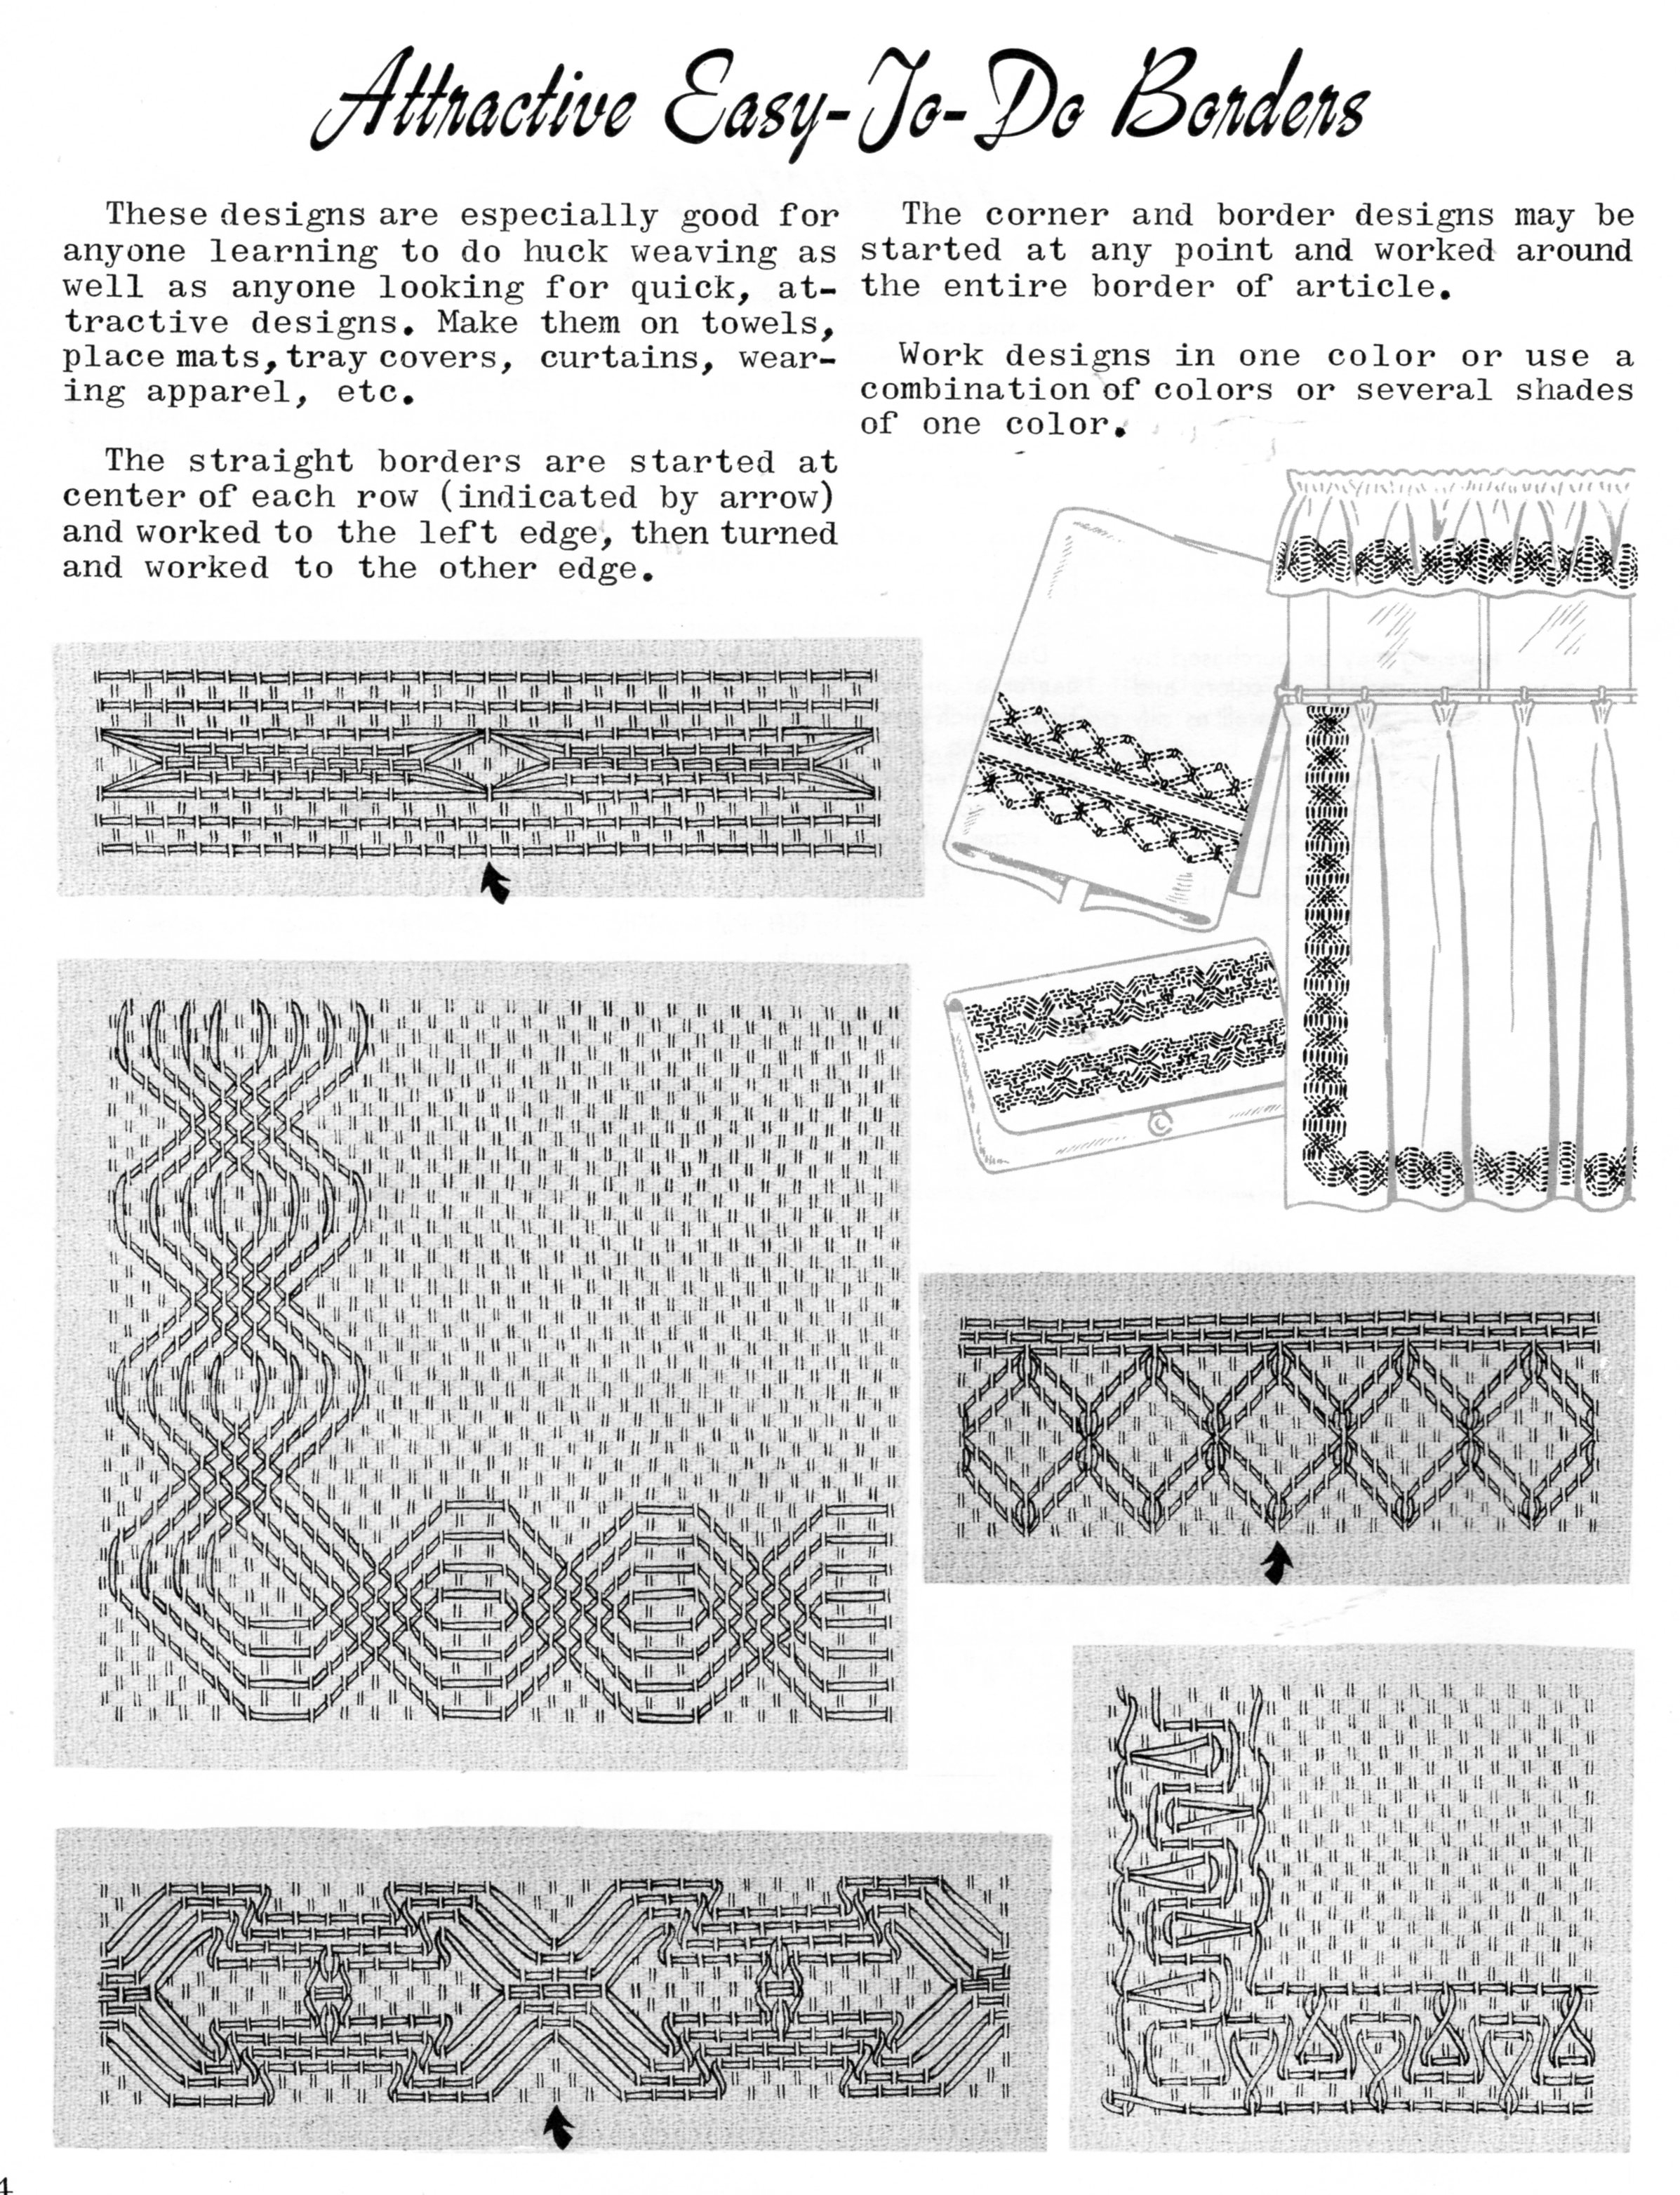 Huck Embroidery Patterns Free Huck Weaving Swedish Weaving Patterns Easy To Do Borders